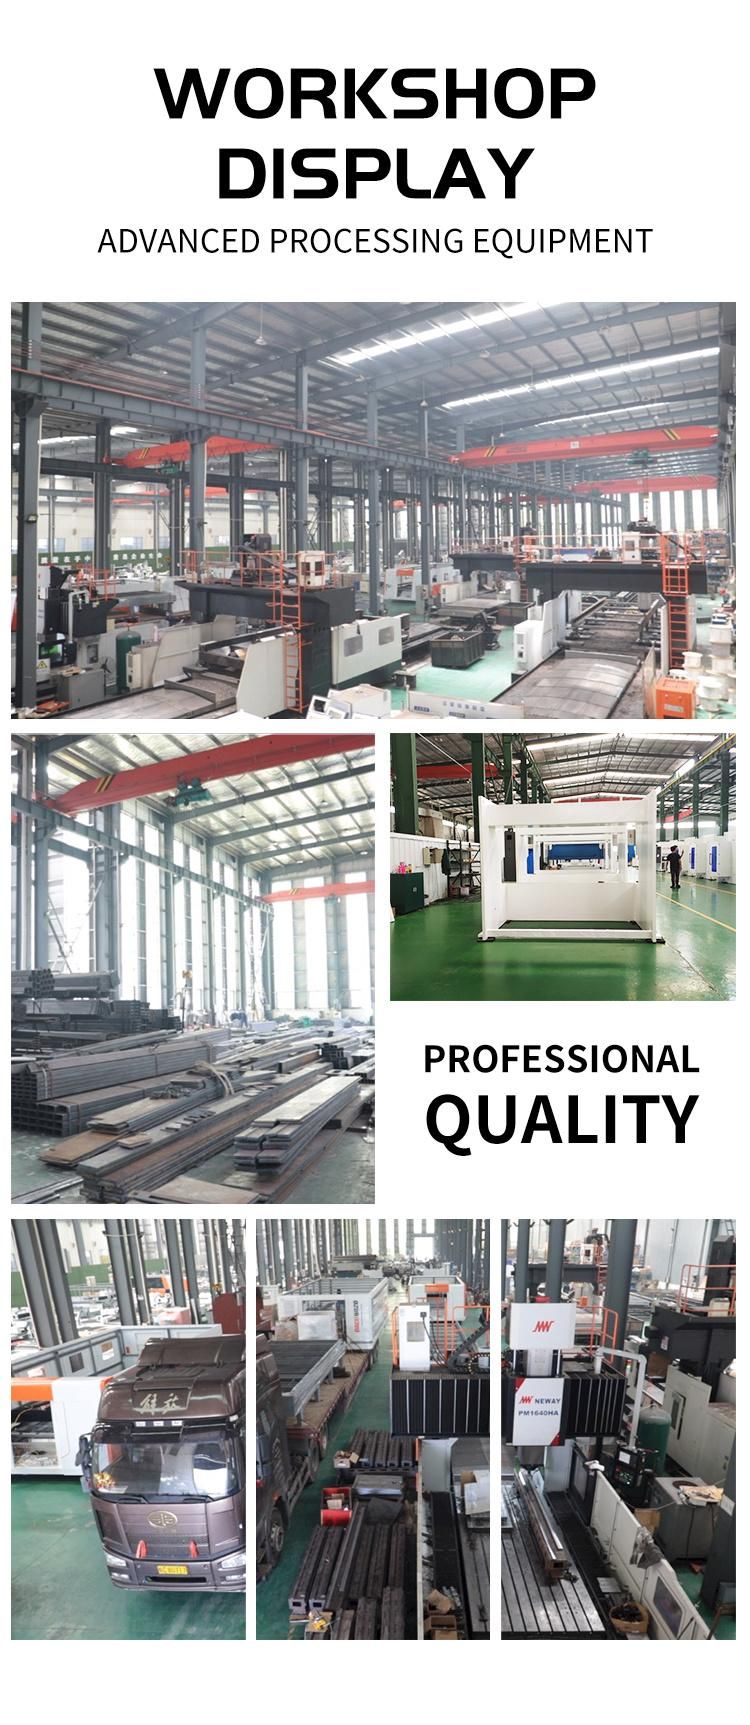 Njwg Sheet Metal Bending Machine 500ton 5000 CNC Hydraulic Stainless Steel Plate Bending Machine for Sale